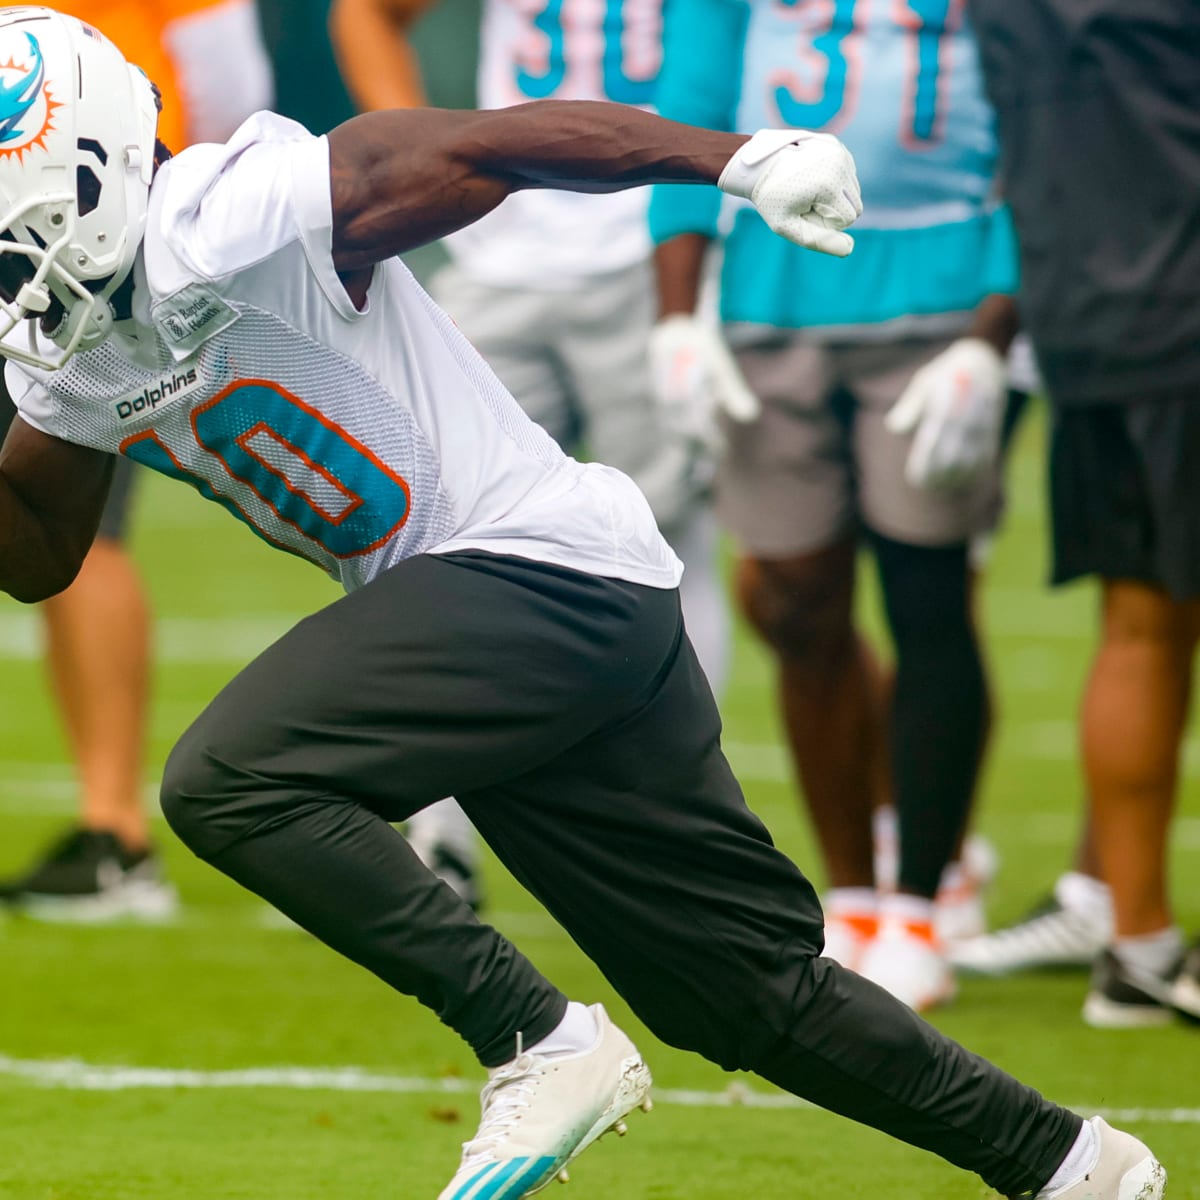 Fantasy Football: 2022 Wide Receiver Draft Approach